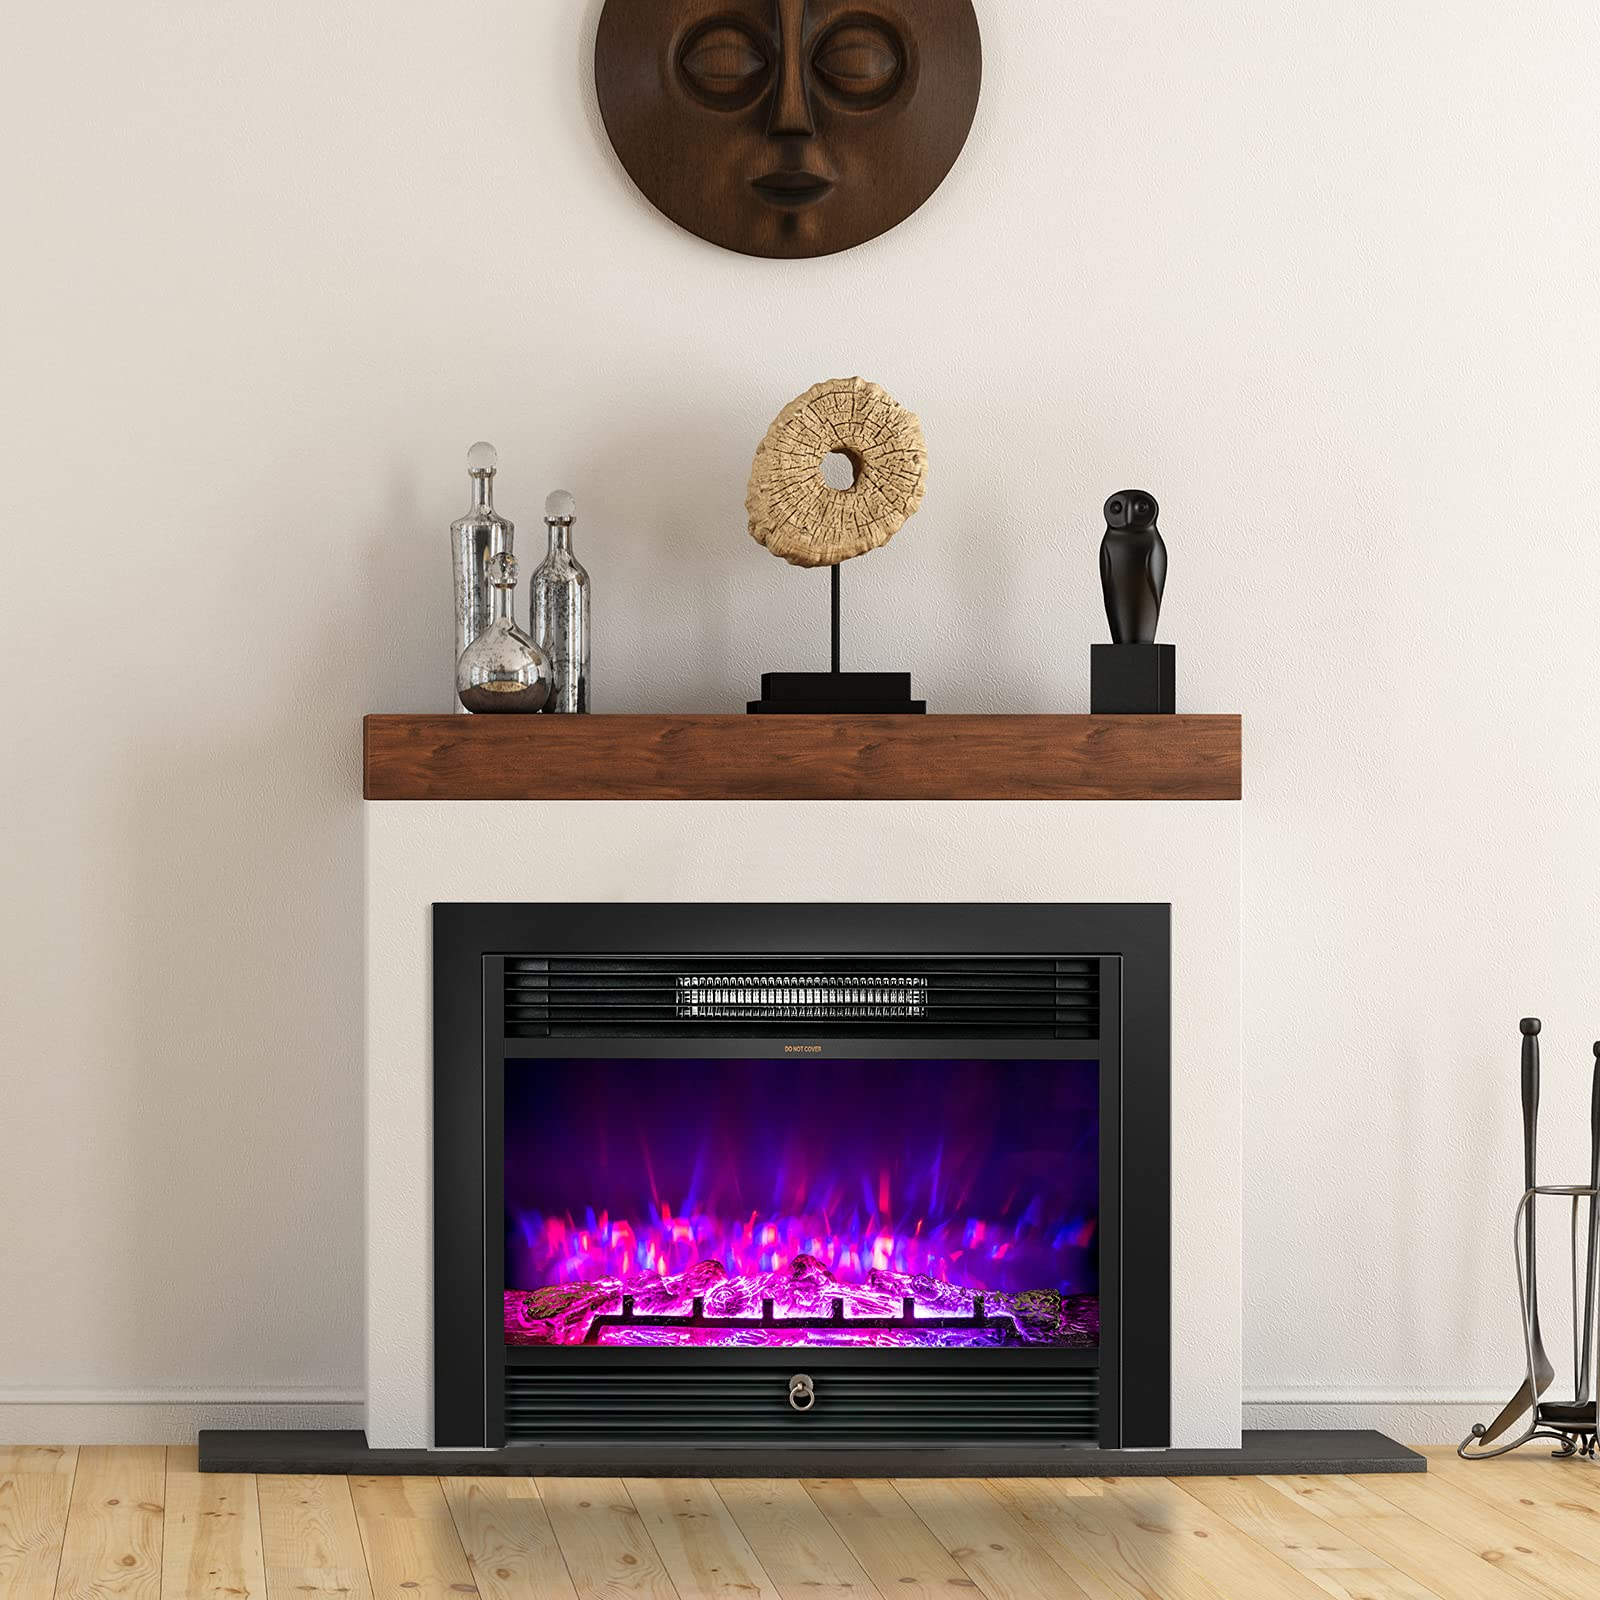 28.5 Inches Recessed Electric Fireplace Insert - Tangkula